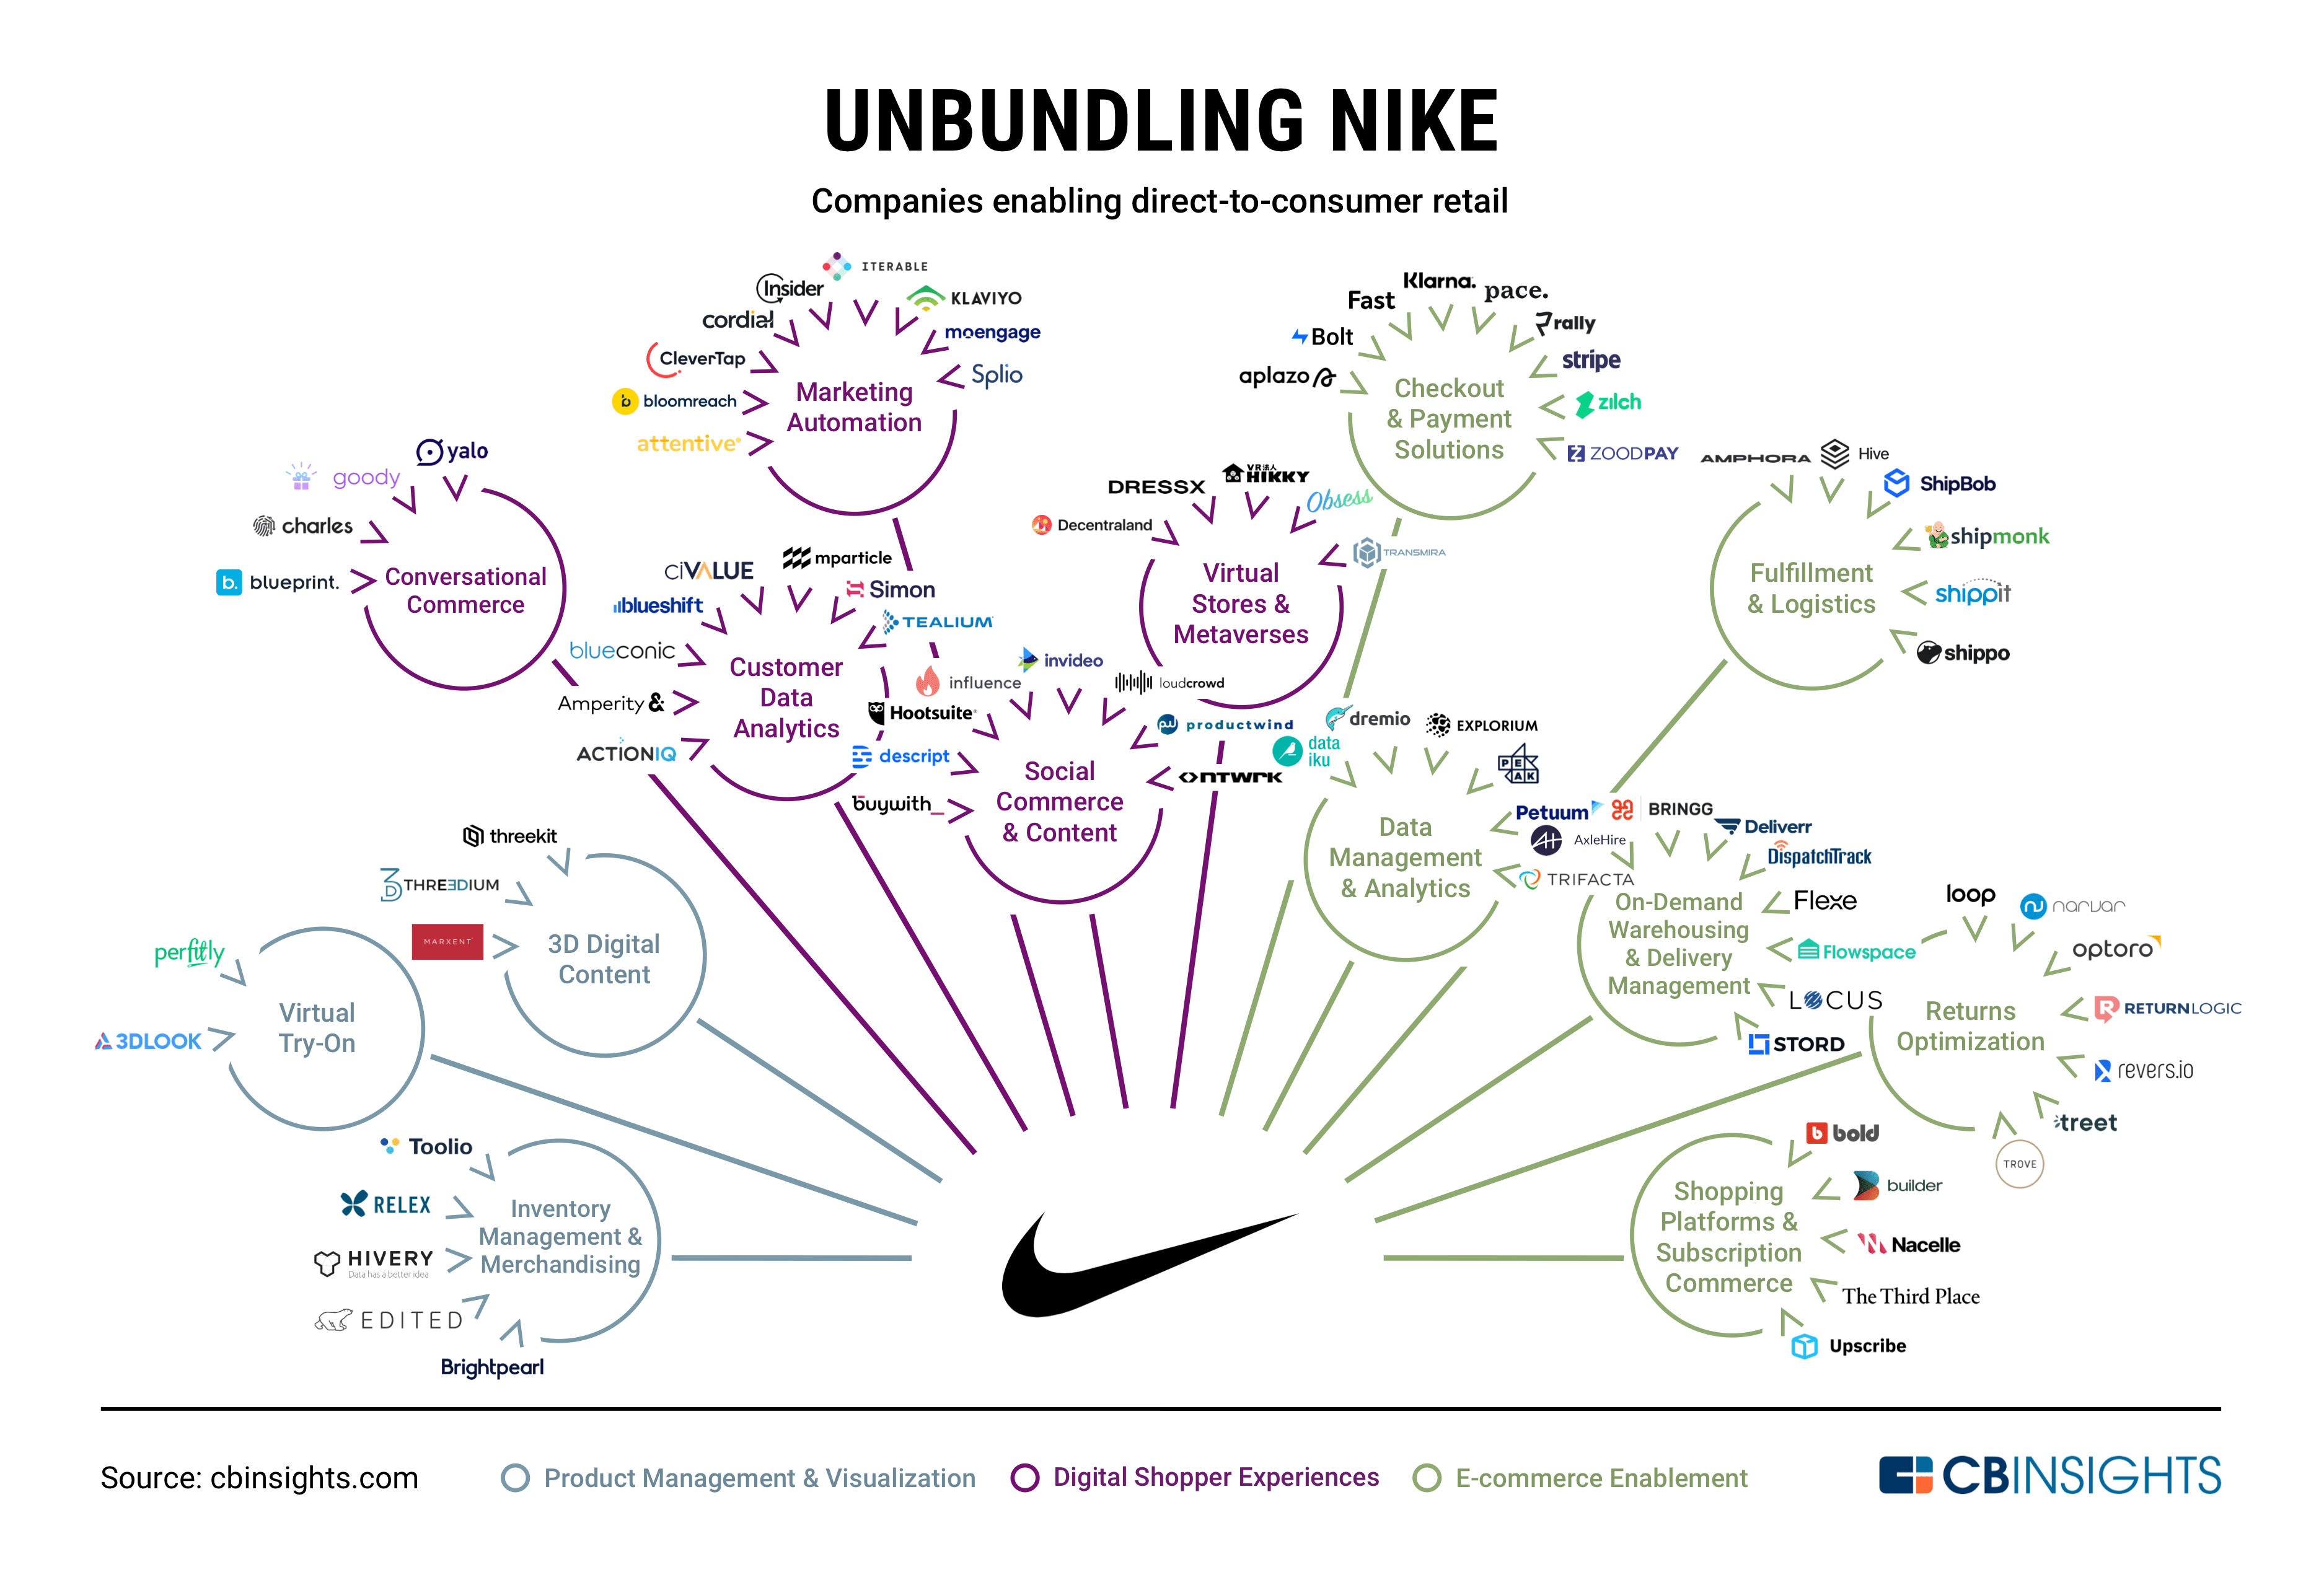 Persona bancarrota Desde Unbundling Nike: How Direct-To-Consumer Retail Is Being Disrupted - CB  Insights Research